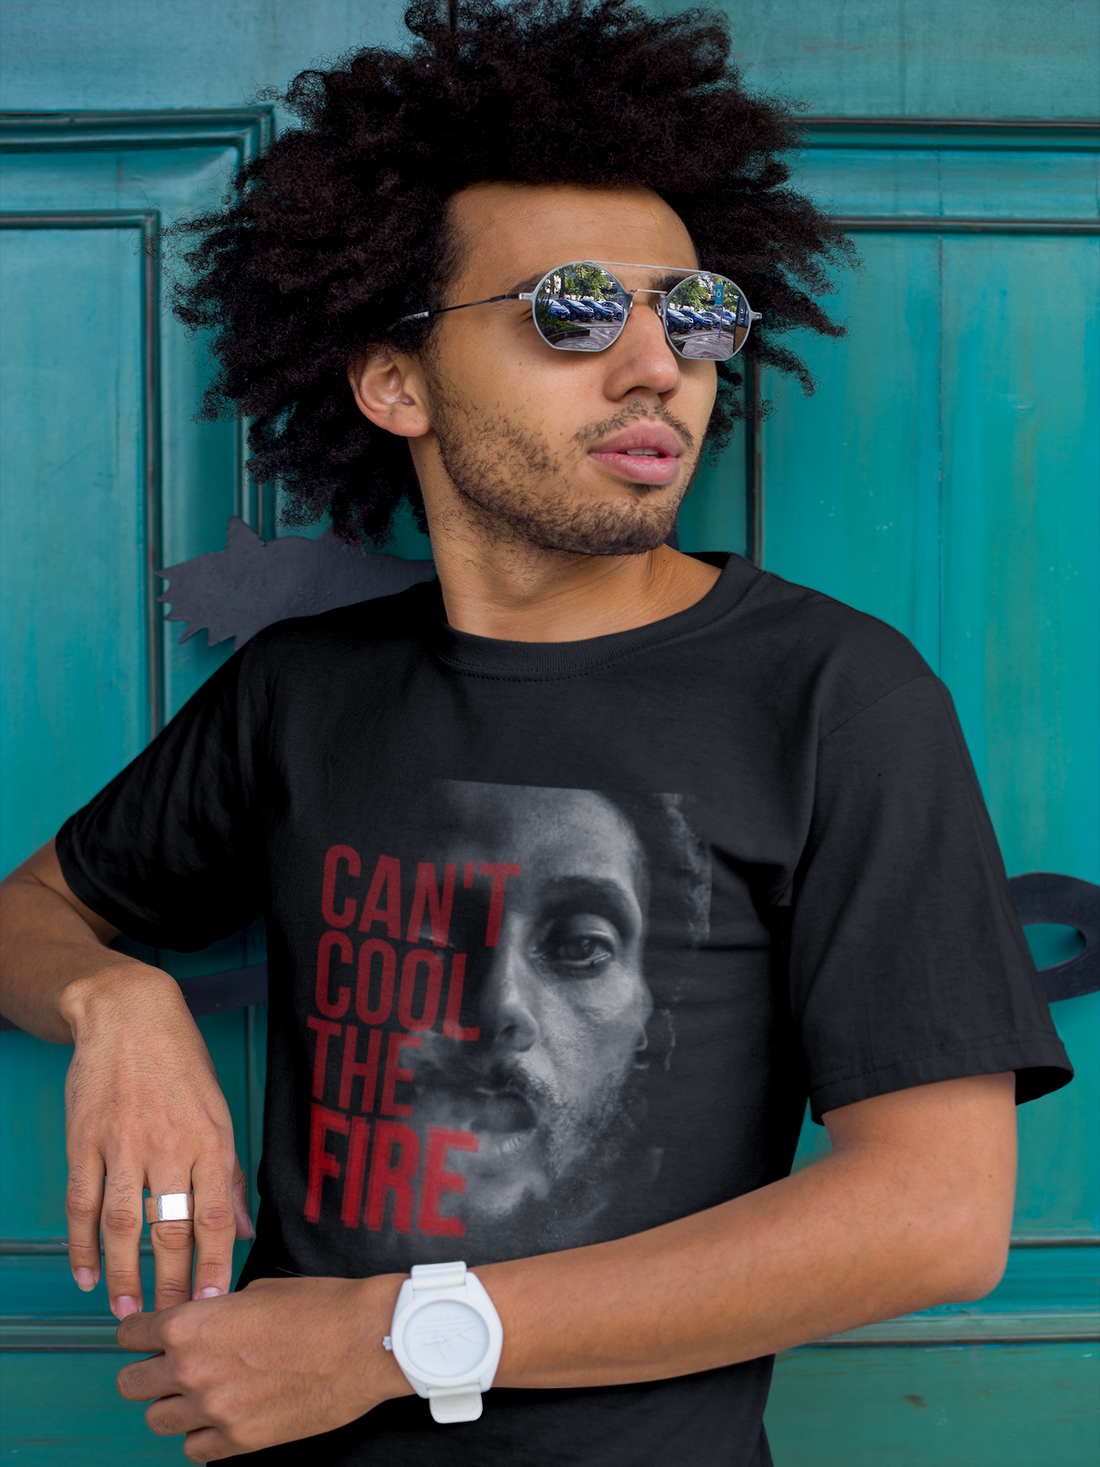 Julian Marley 'Can't Cool the Fire' Short-Sleeve Unisex T-Shirt - Nine Mile Clothing 